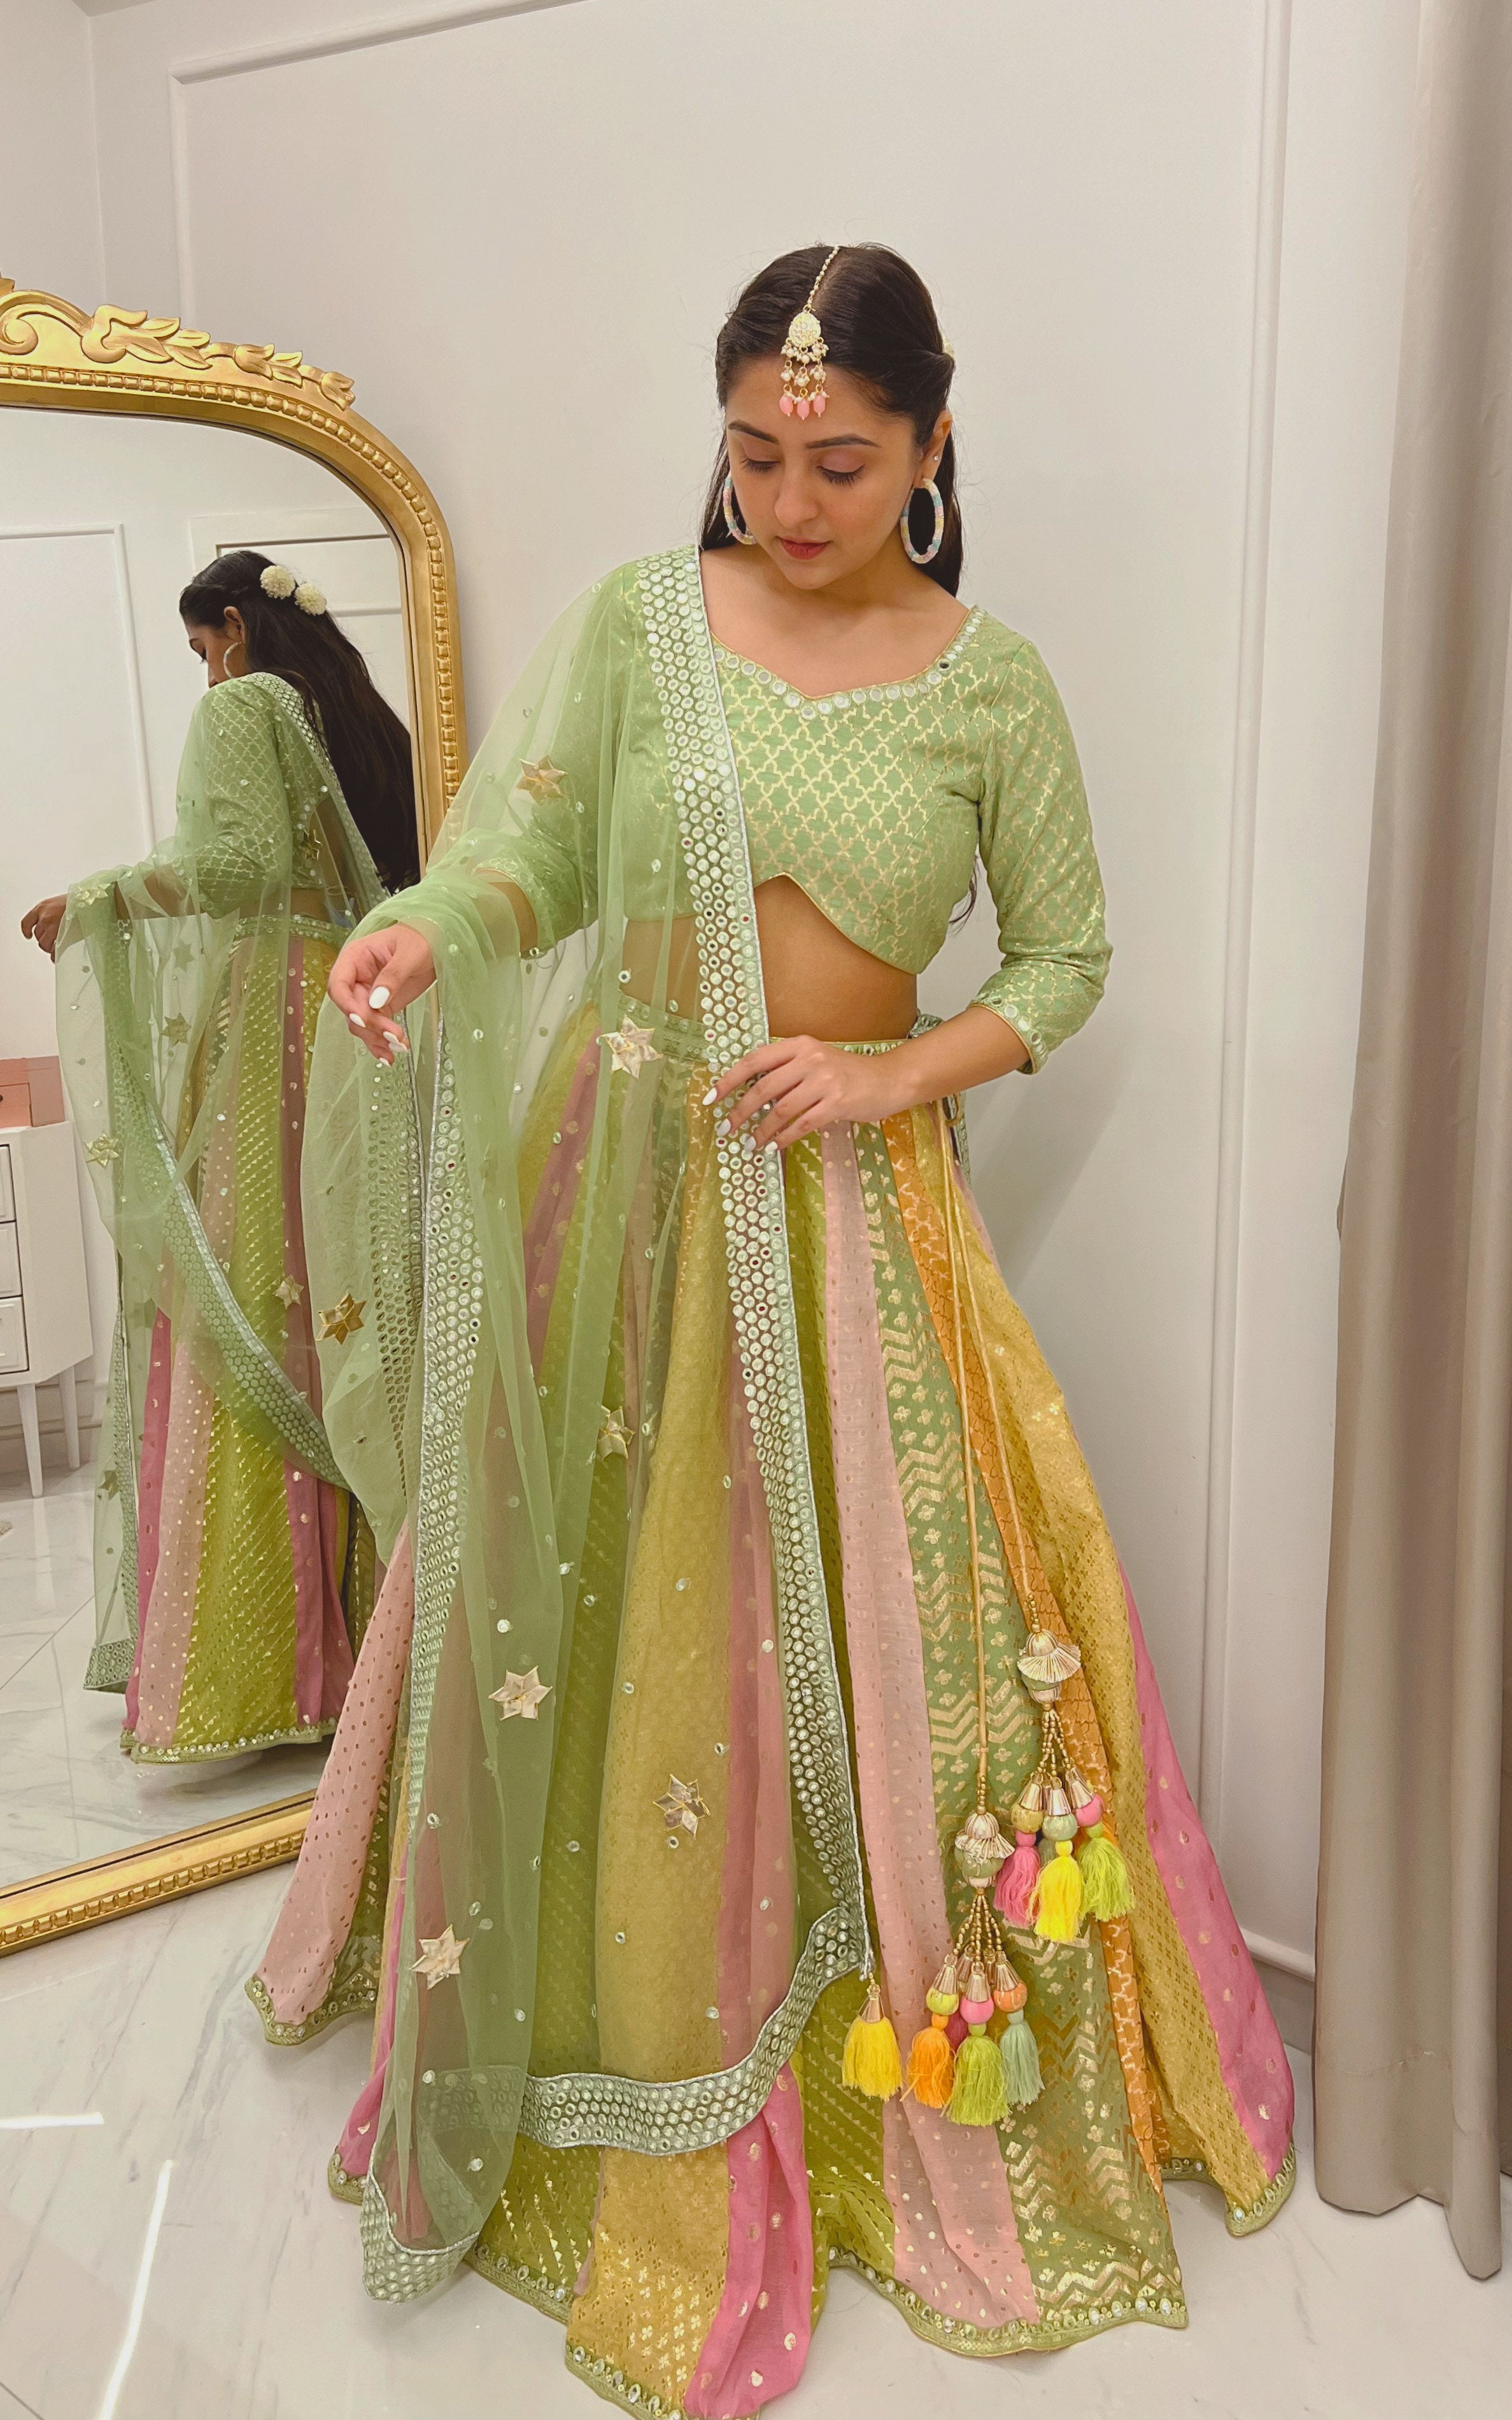 Gorgeous Outfit Ideas For Sisters Of Bride & Groom | Shaadi Baraati